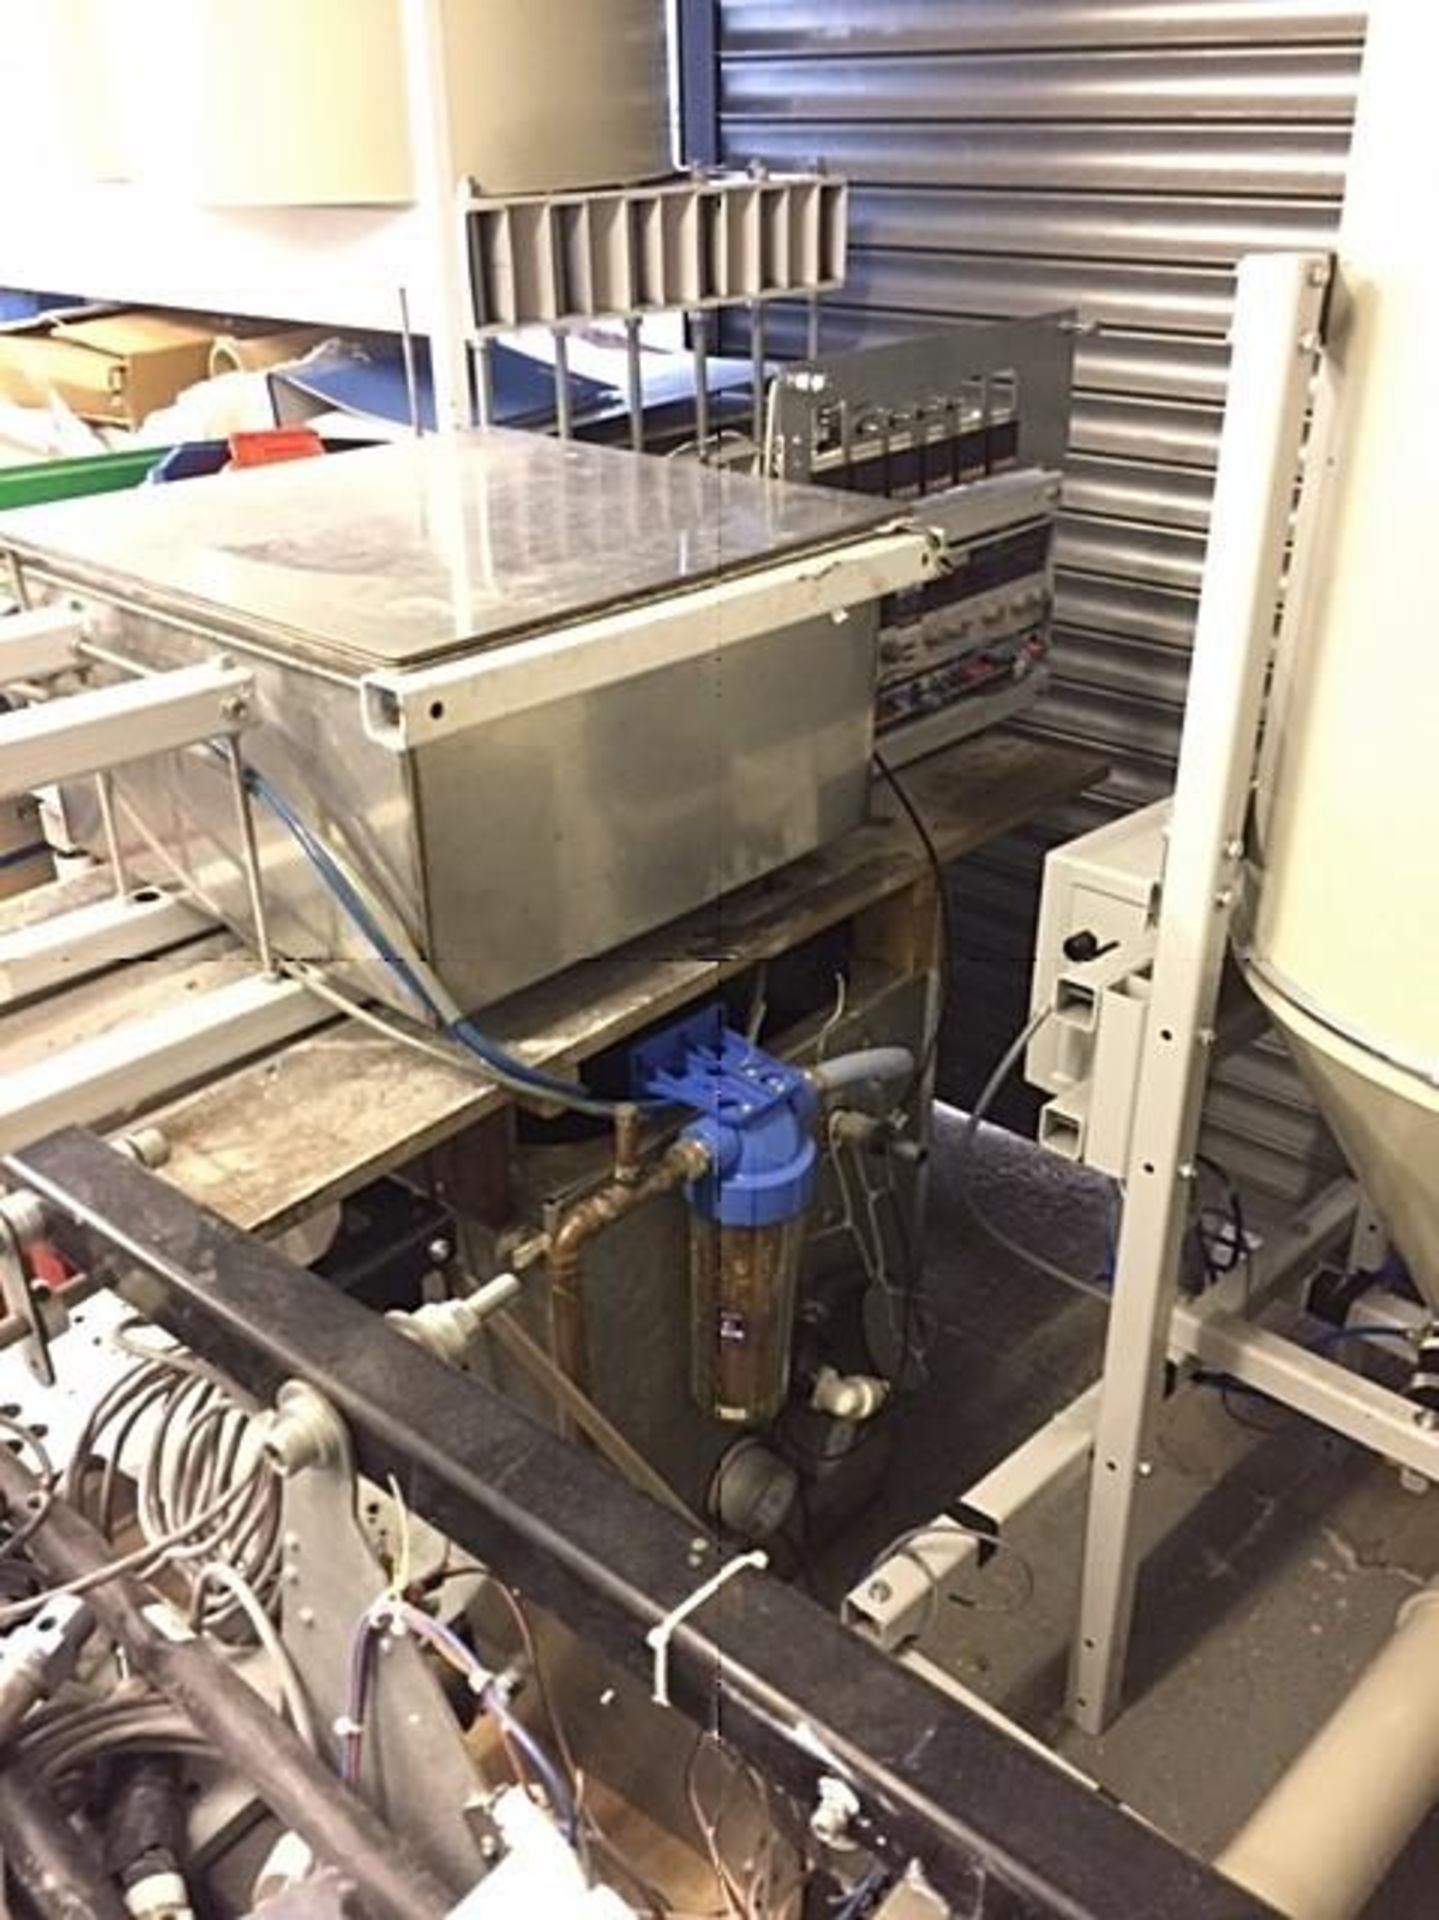 1 x British Standard Hot Plate Test Rig (300 x 300mm sample size) - Ref: PC - CL386 - Location: Bolt